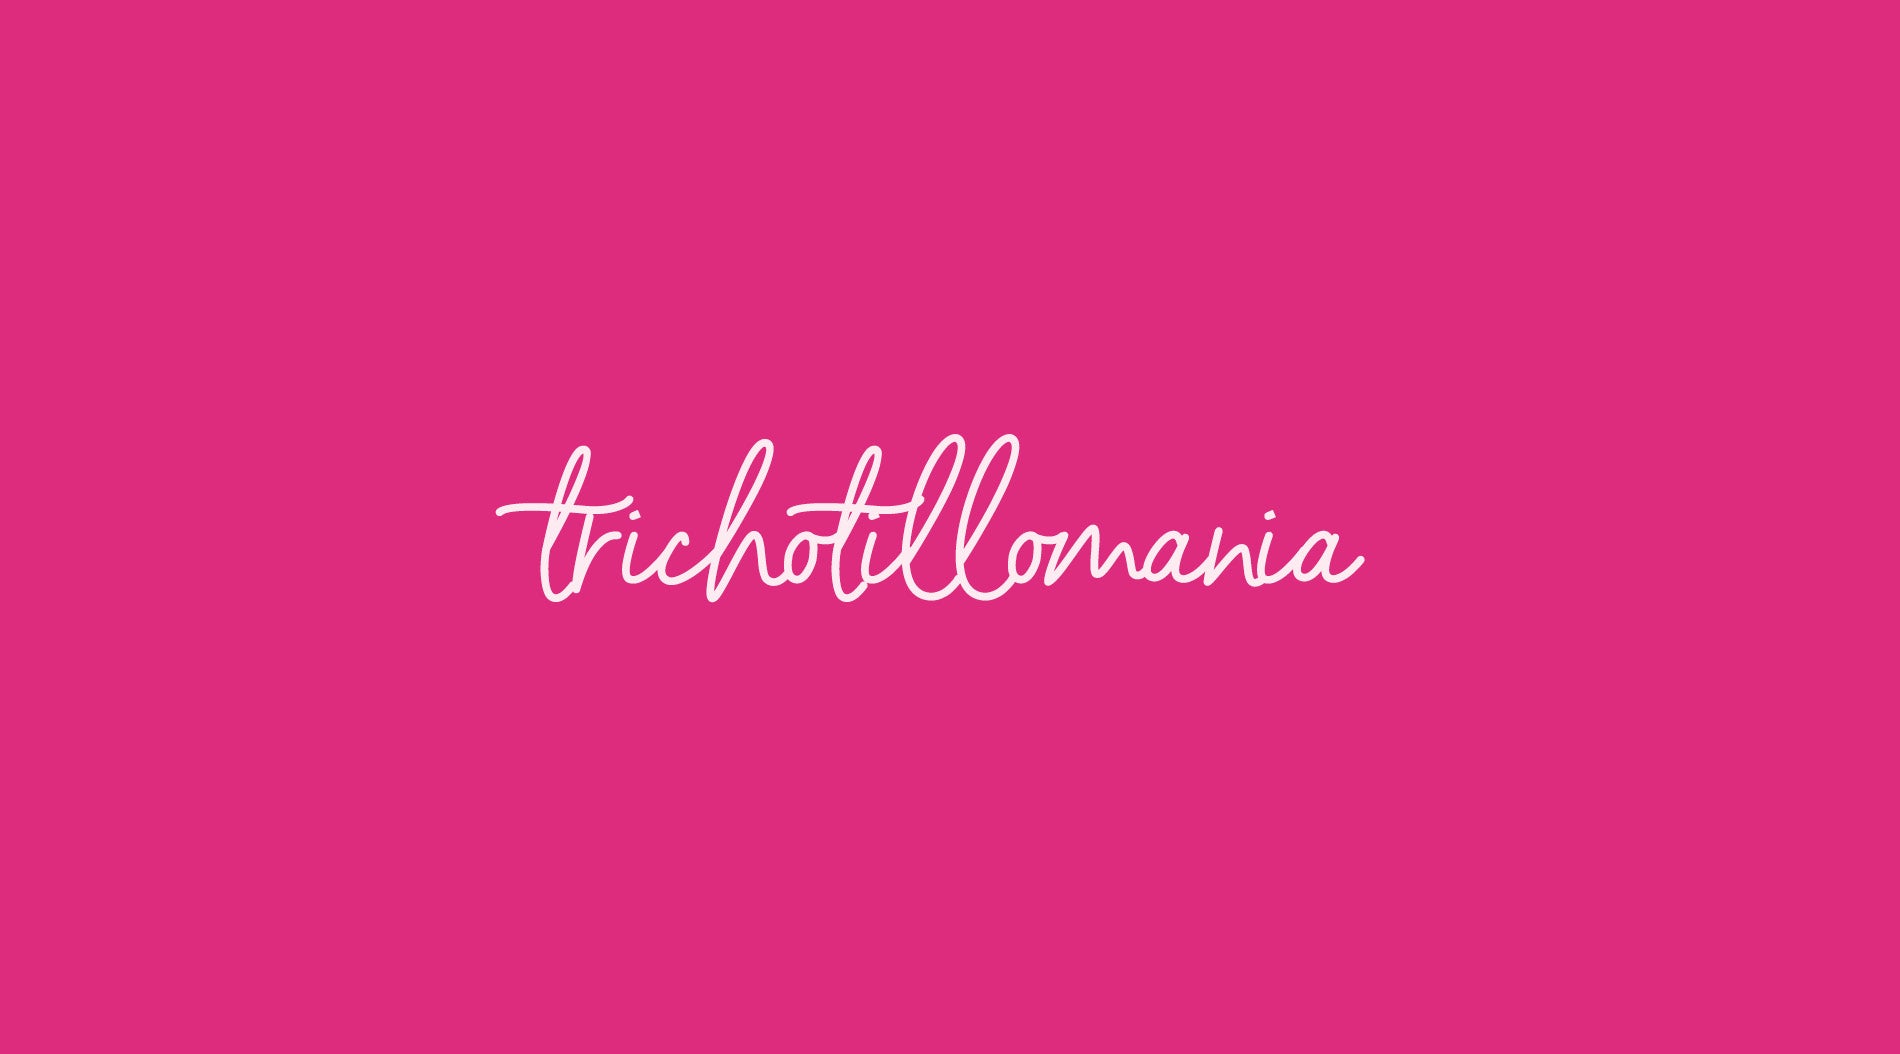 Trichotillomania - What is it?